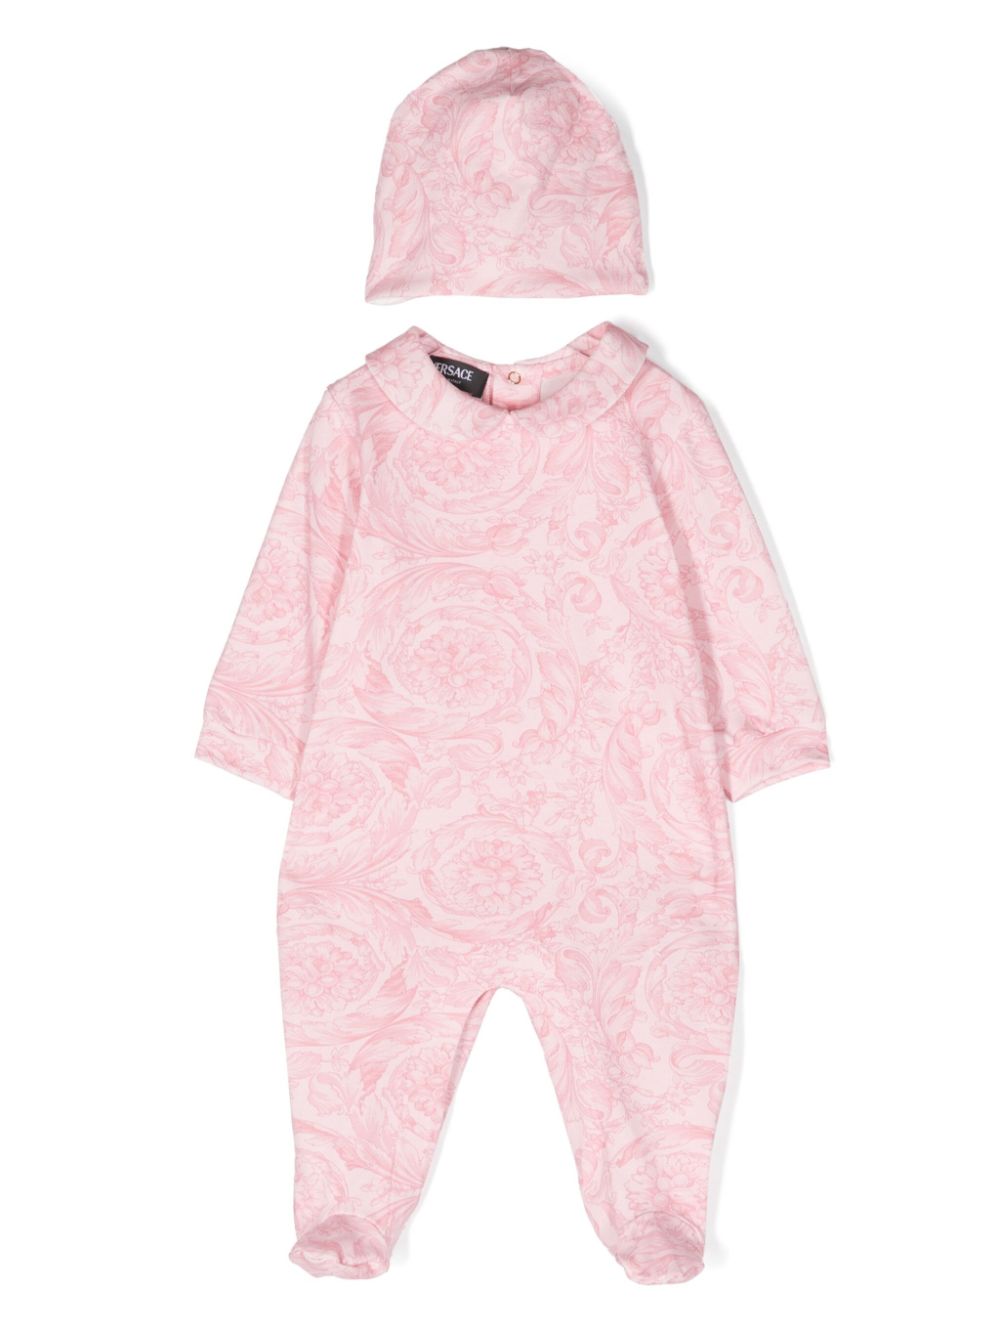 Pink baby girl onesie with print